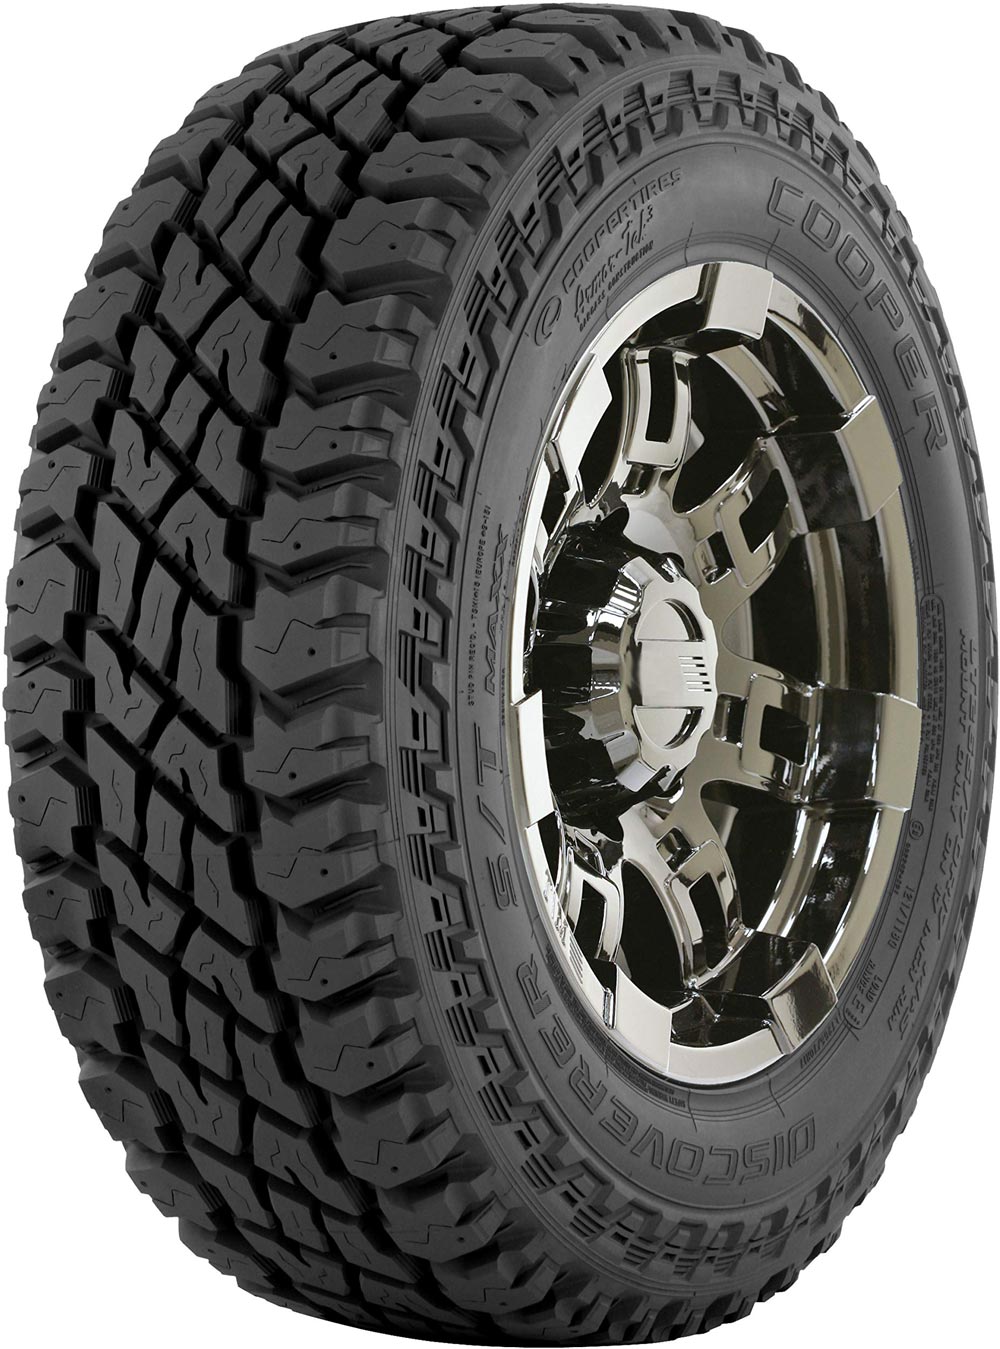 COOPER DISCOVERER ST MAXX P O BSW 245/75 R17 121Q